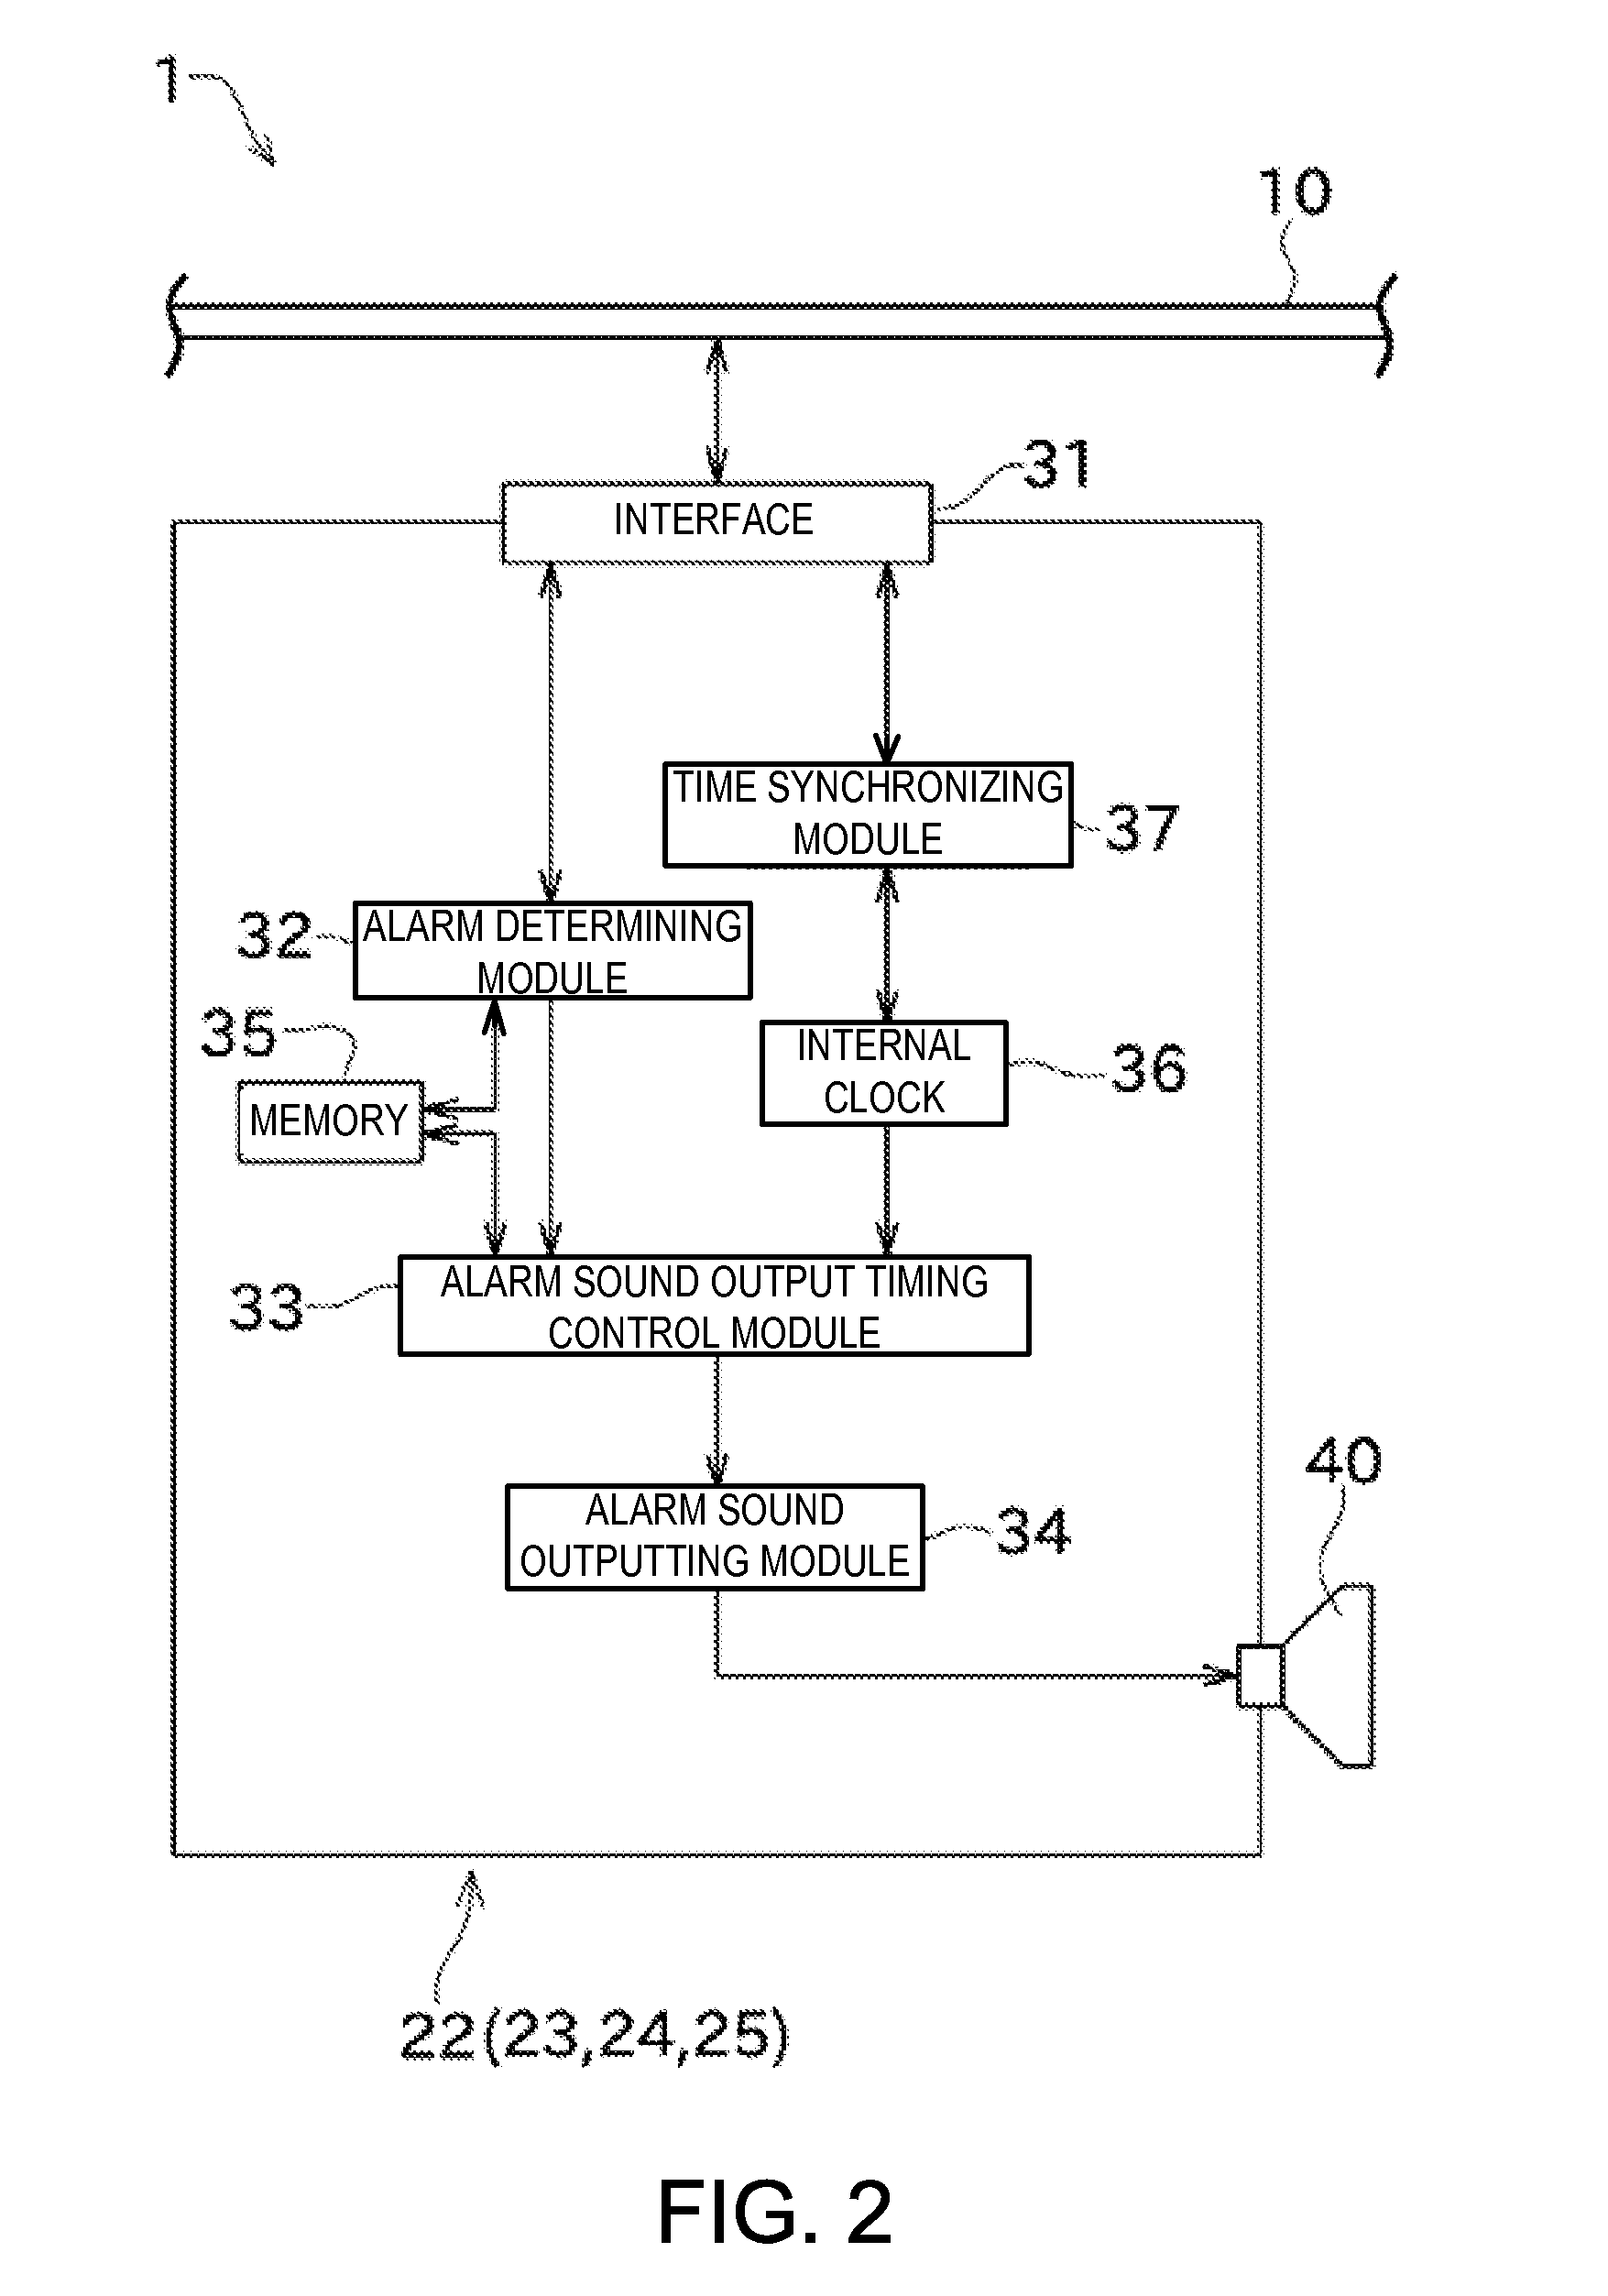 Device, system and method for informing alarm